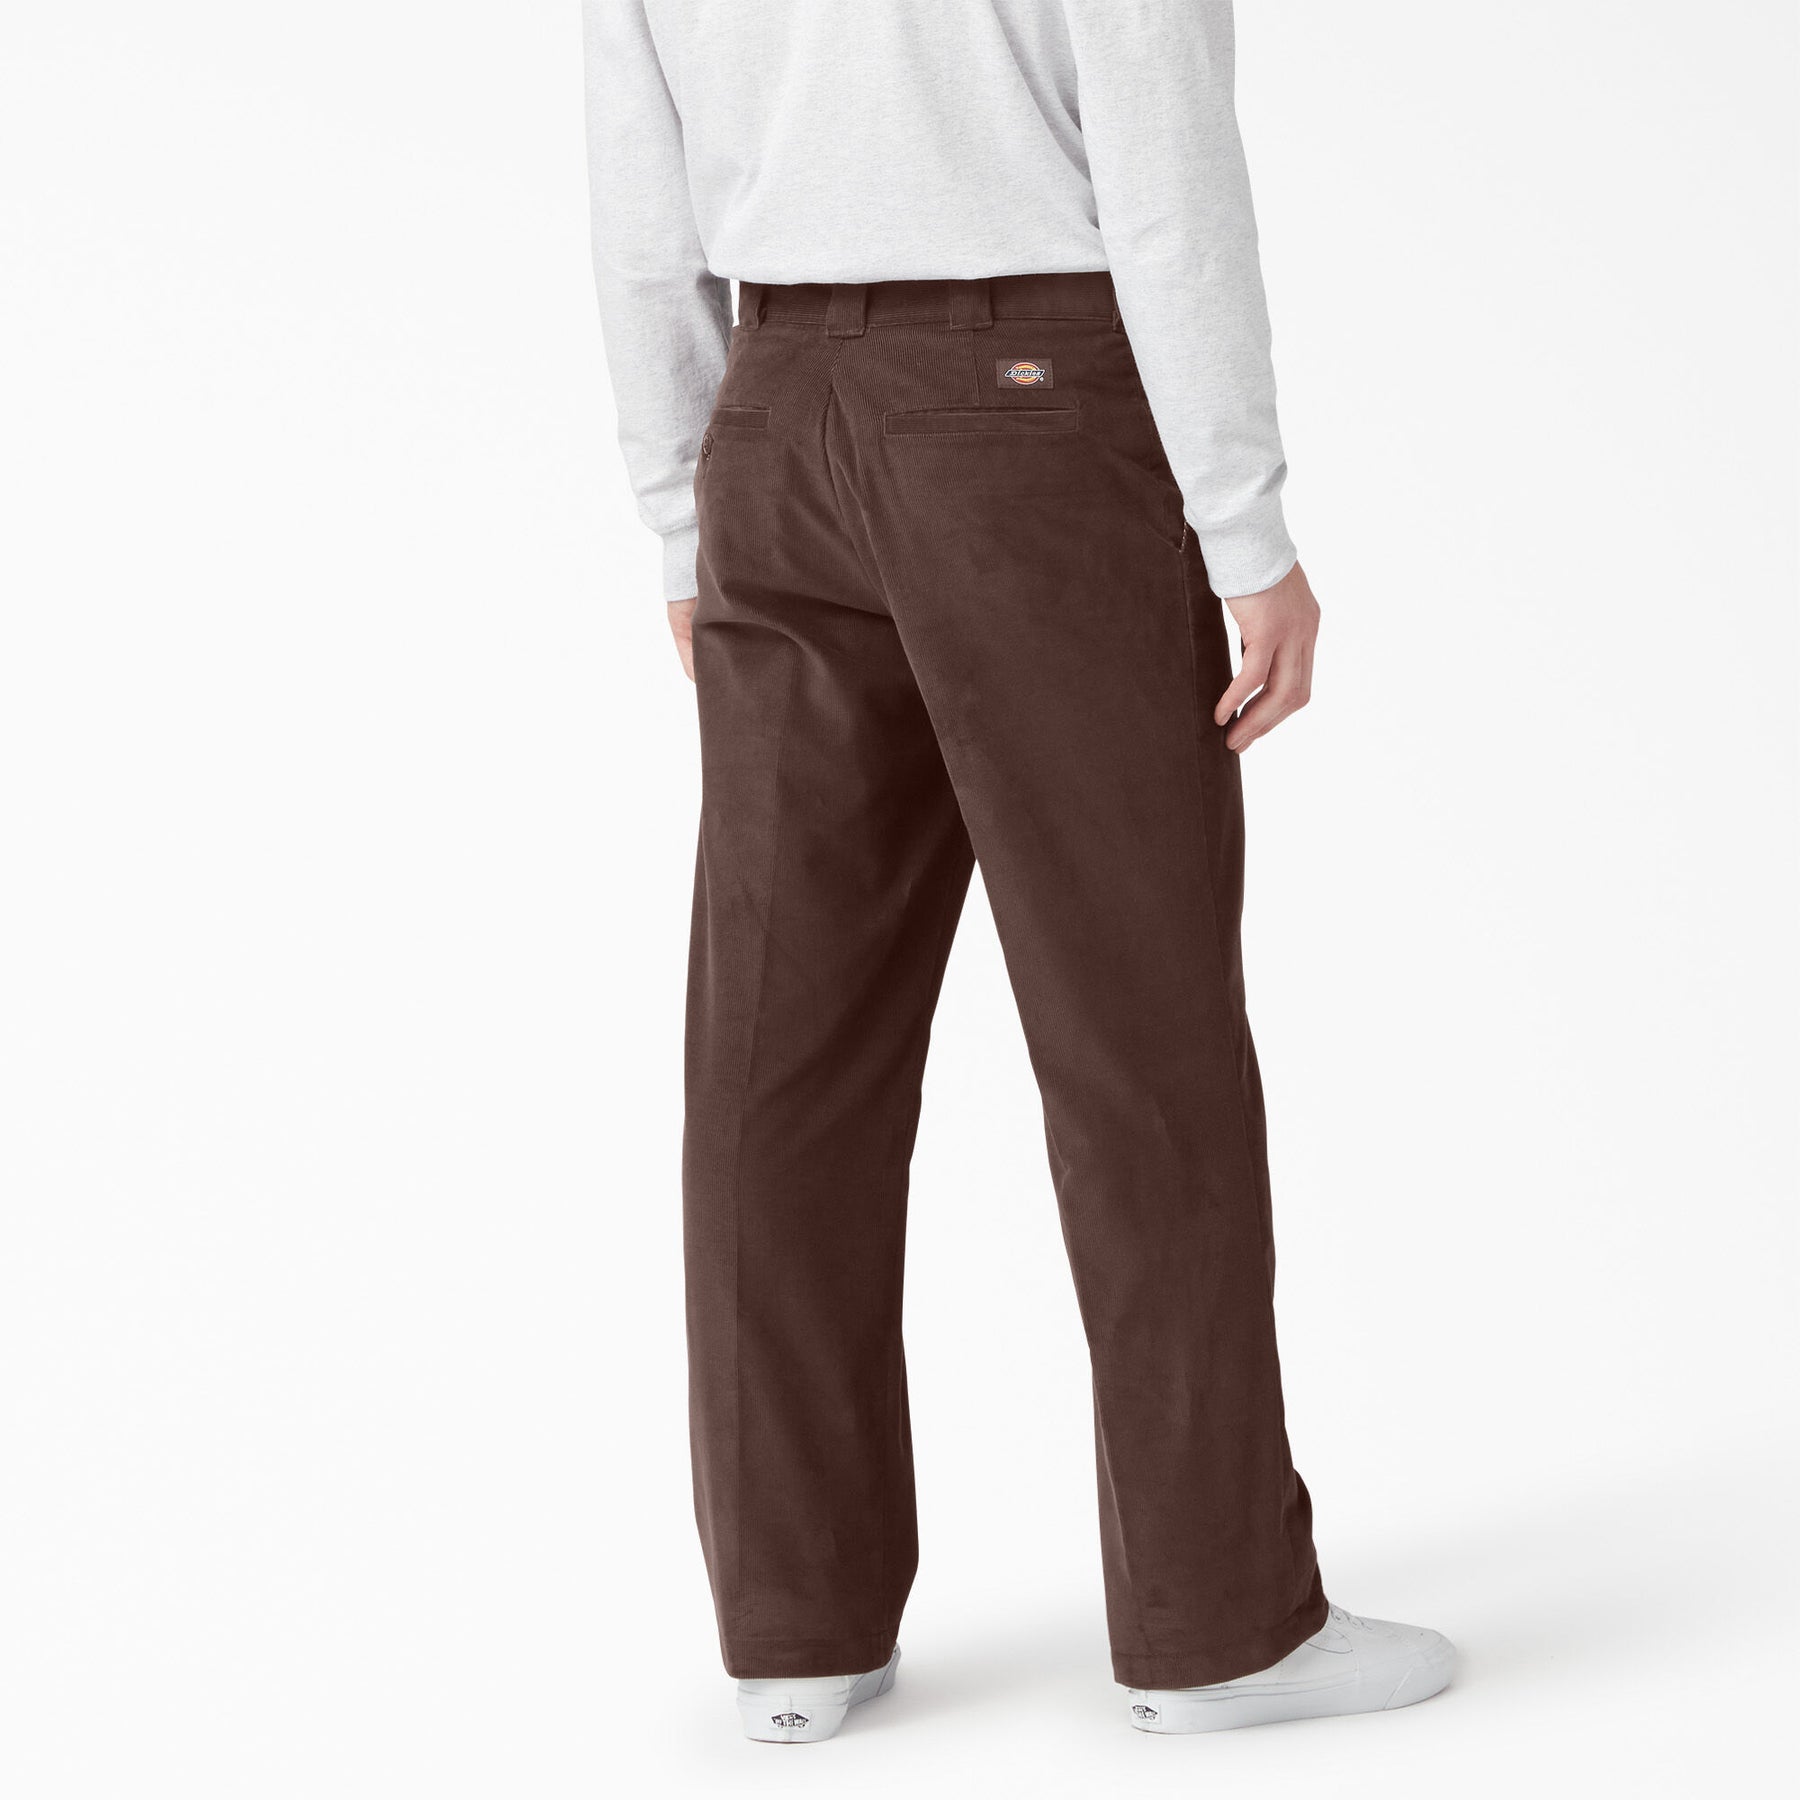 Crolenda PU Tapered Trouser Bitter Chocolate | French Connection US